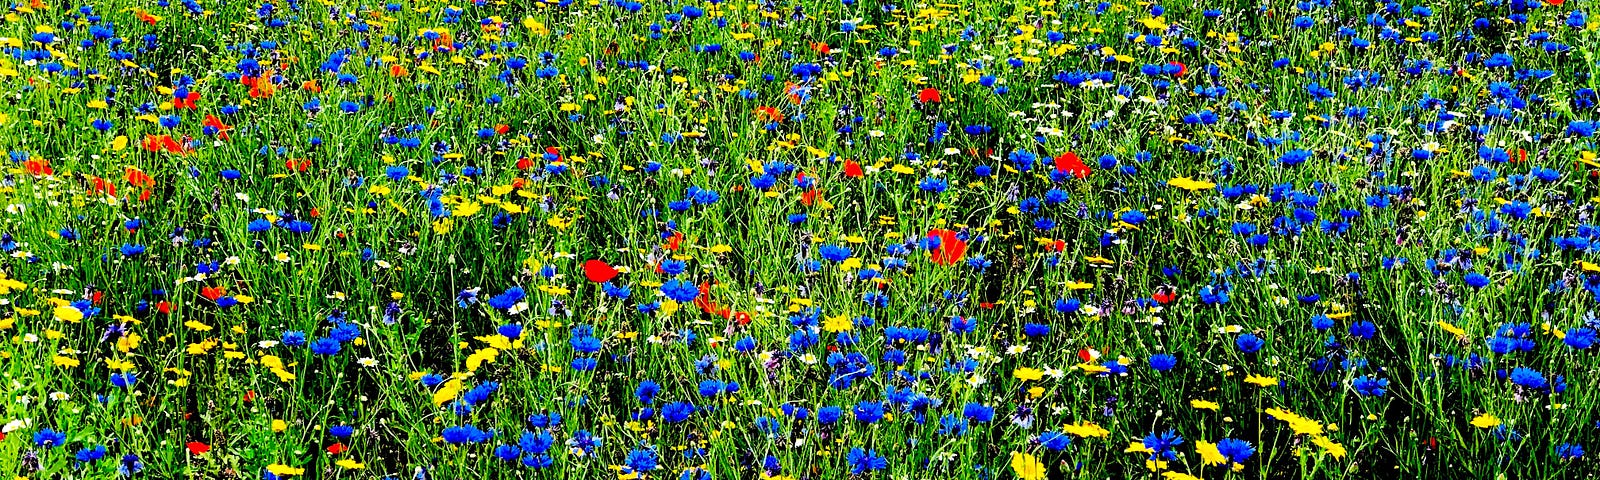 Blue, red and yellow flowers in a field